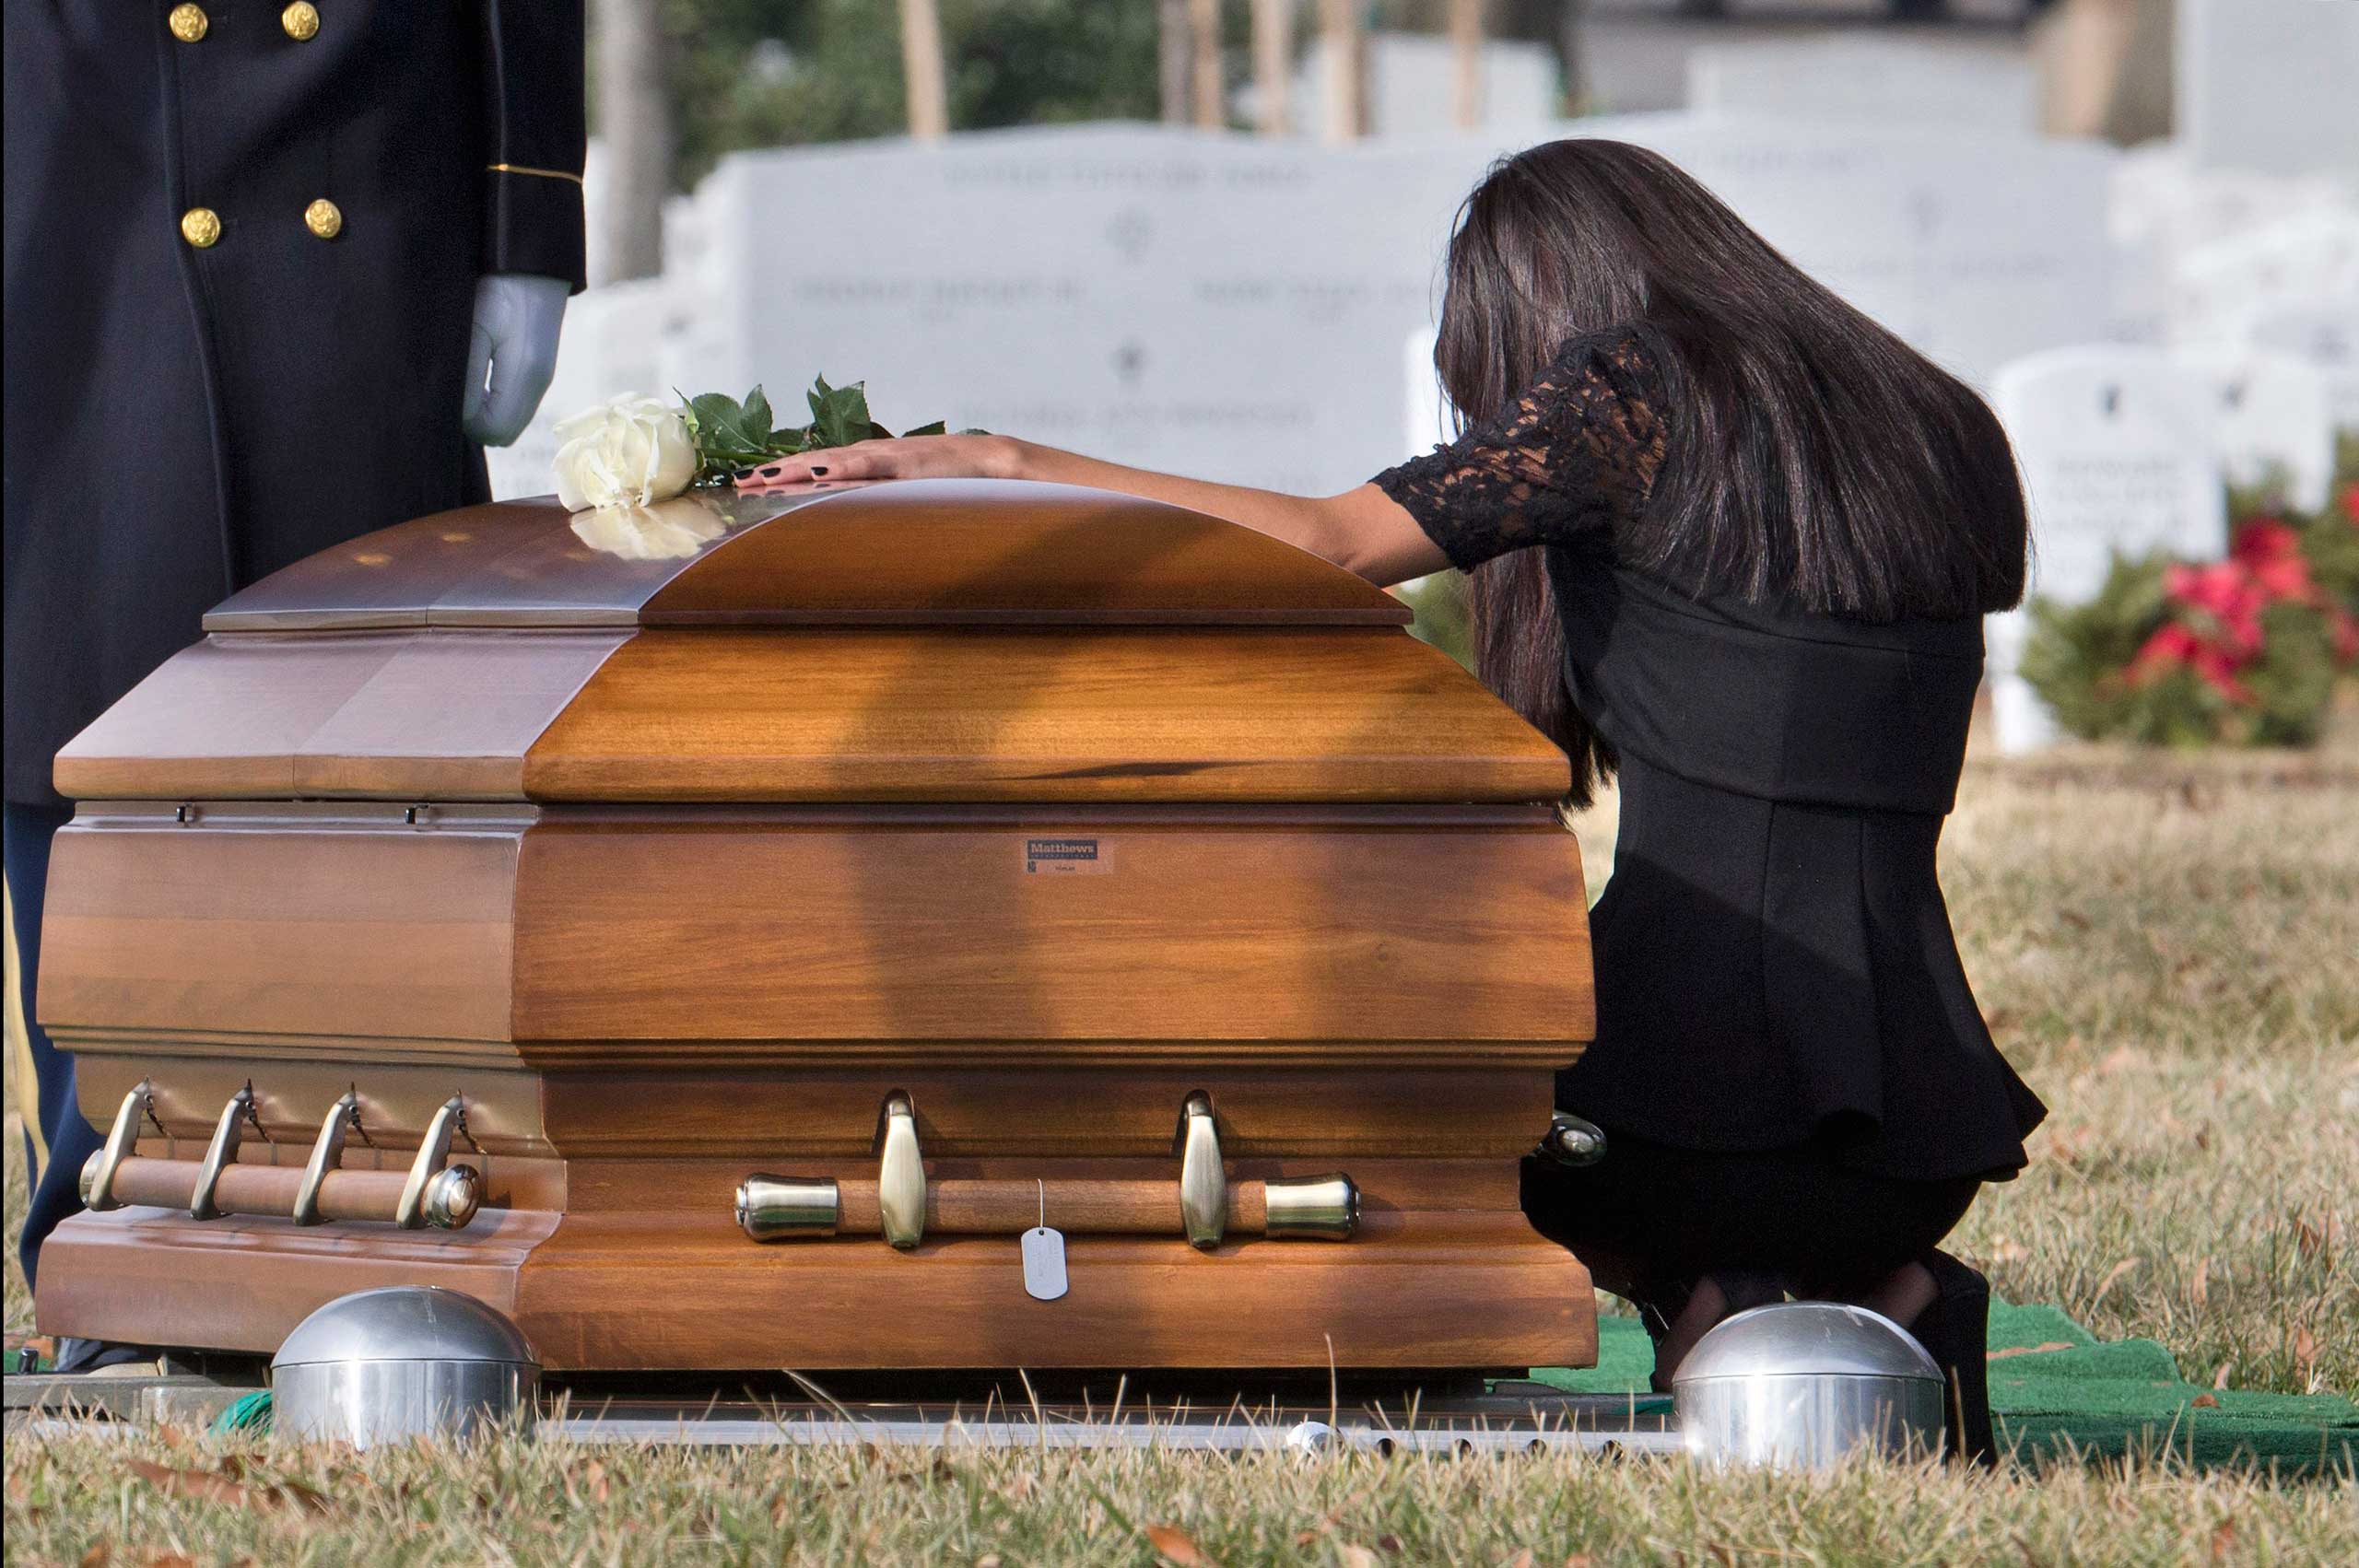 Jan. 23, 2015. Christina Strange mourns after laying a white rose on the casket for her fiancé, Army Sgt. 1st Class Ramon S. Morris, of New York City, during his burial services at Arlington National Cemetery in Arlington, Va. Morris died in Parwan Province, Afghanistan, of wounds suffered when the enemy attacked his vehicle with an improvised explosive device. Strange is the mother of Morris' three-year-daughter.